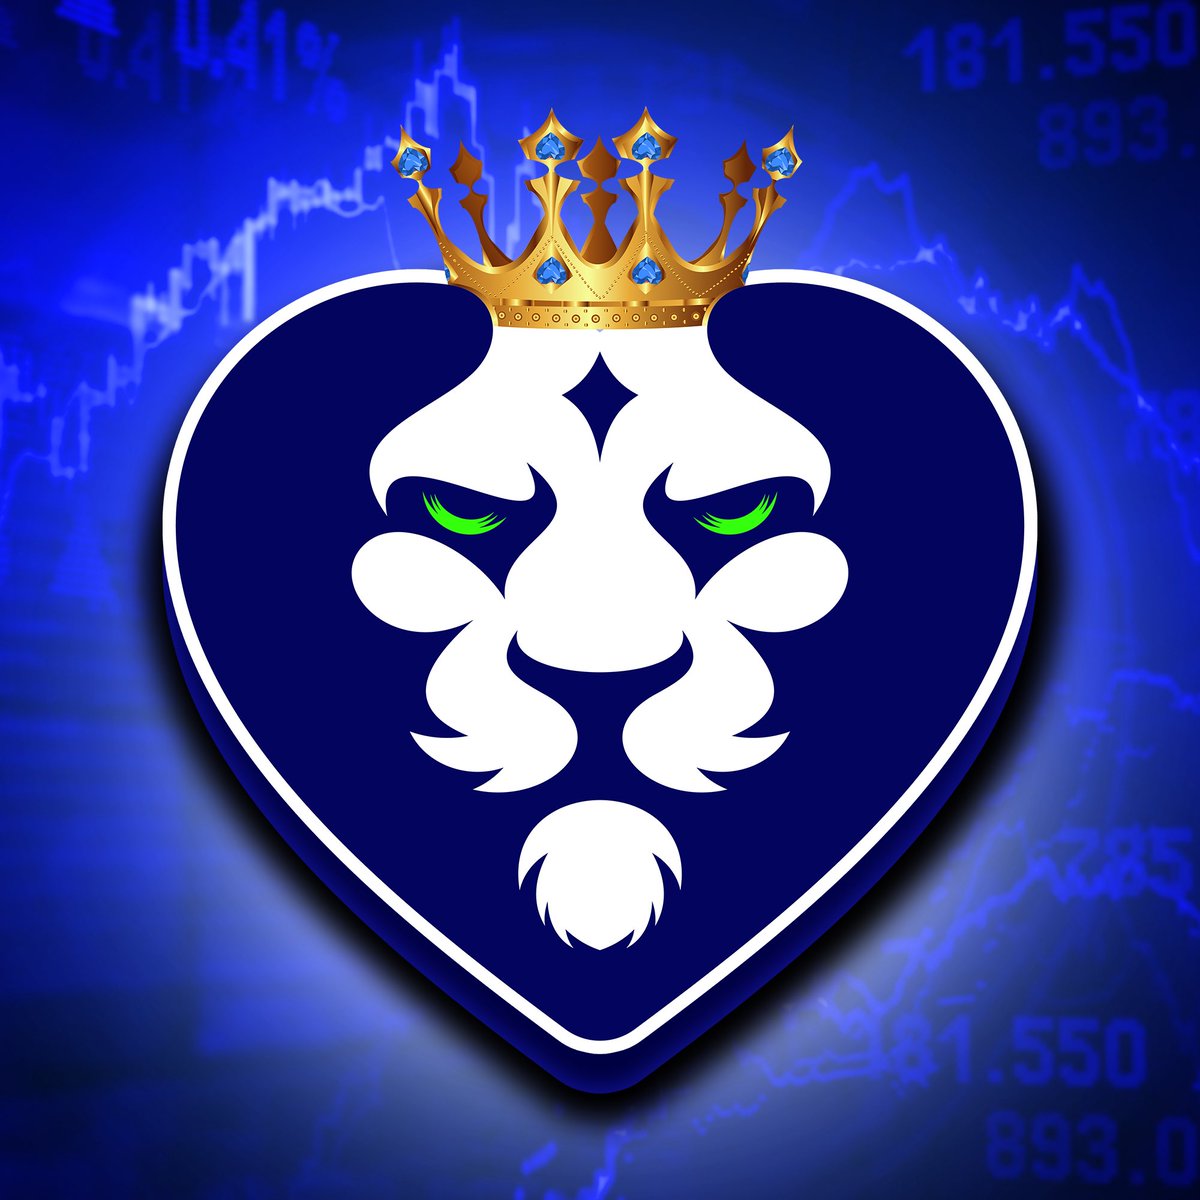 10x $5,000 Giveaway Account🎉 ✅ Must follow these steps: ✅ Follow @lionheartLFP @NdemazeahG @kr4zyguy_ ✅ Join LFP Traders Email List: bit.ly/4a92v12 ✅ Like & Retweet ✅ Tag 3 traders (not influencers) ✅ Join LFP Discord: bit.ly/4aSg4Me I’ll choose…